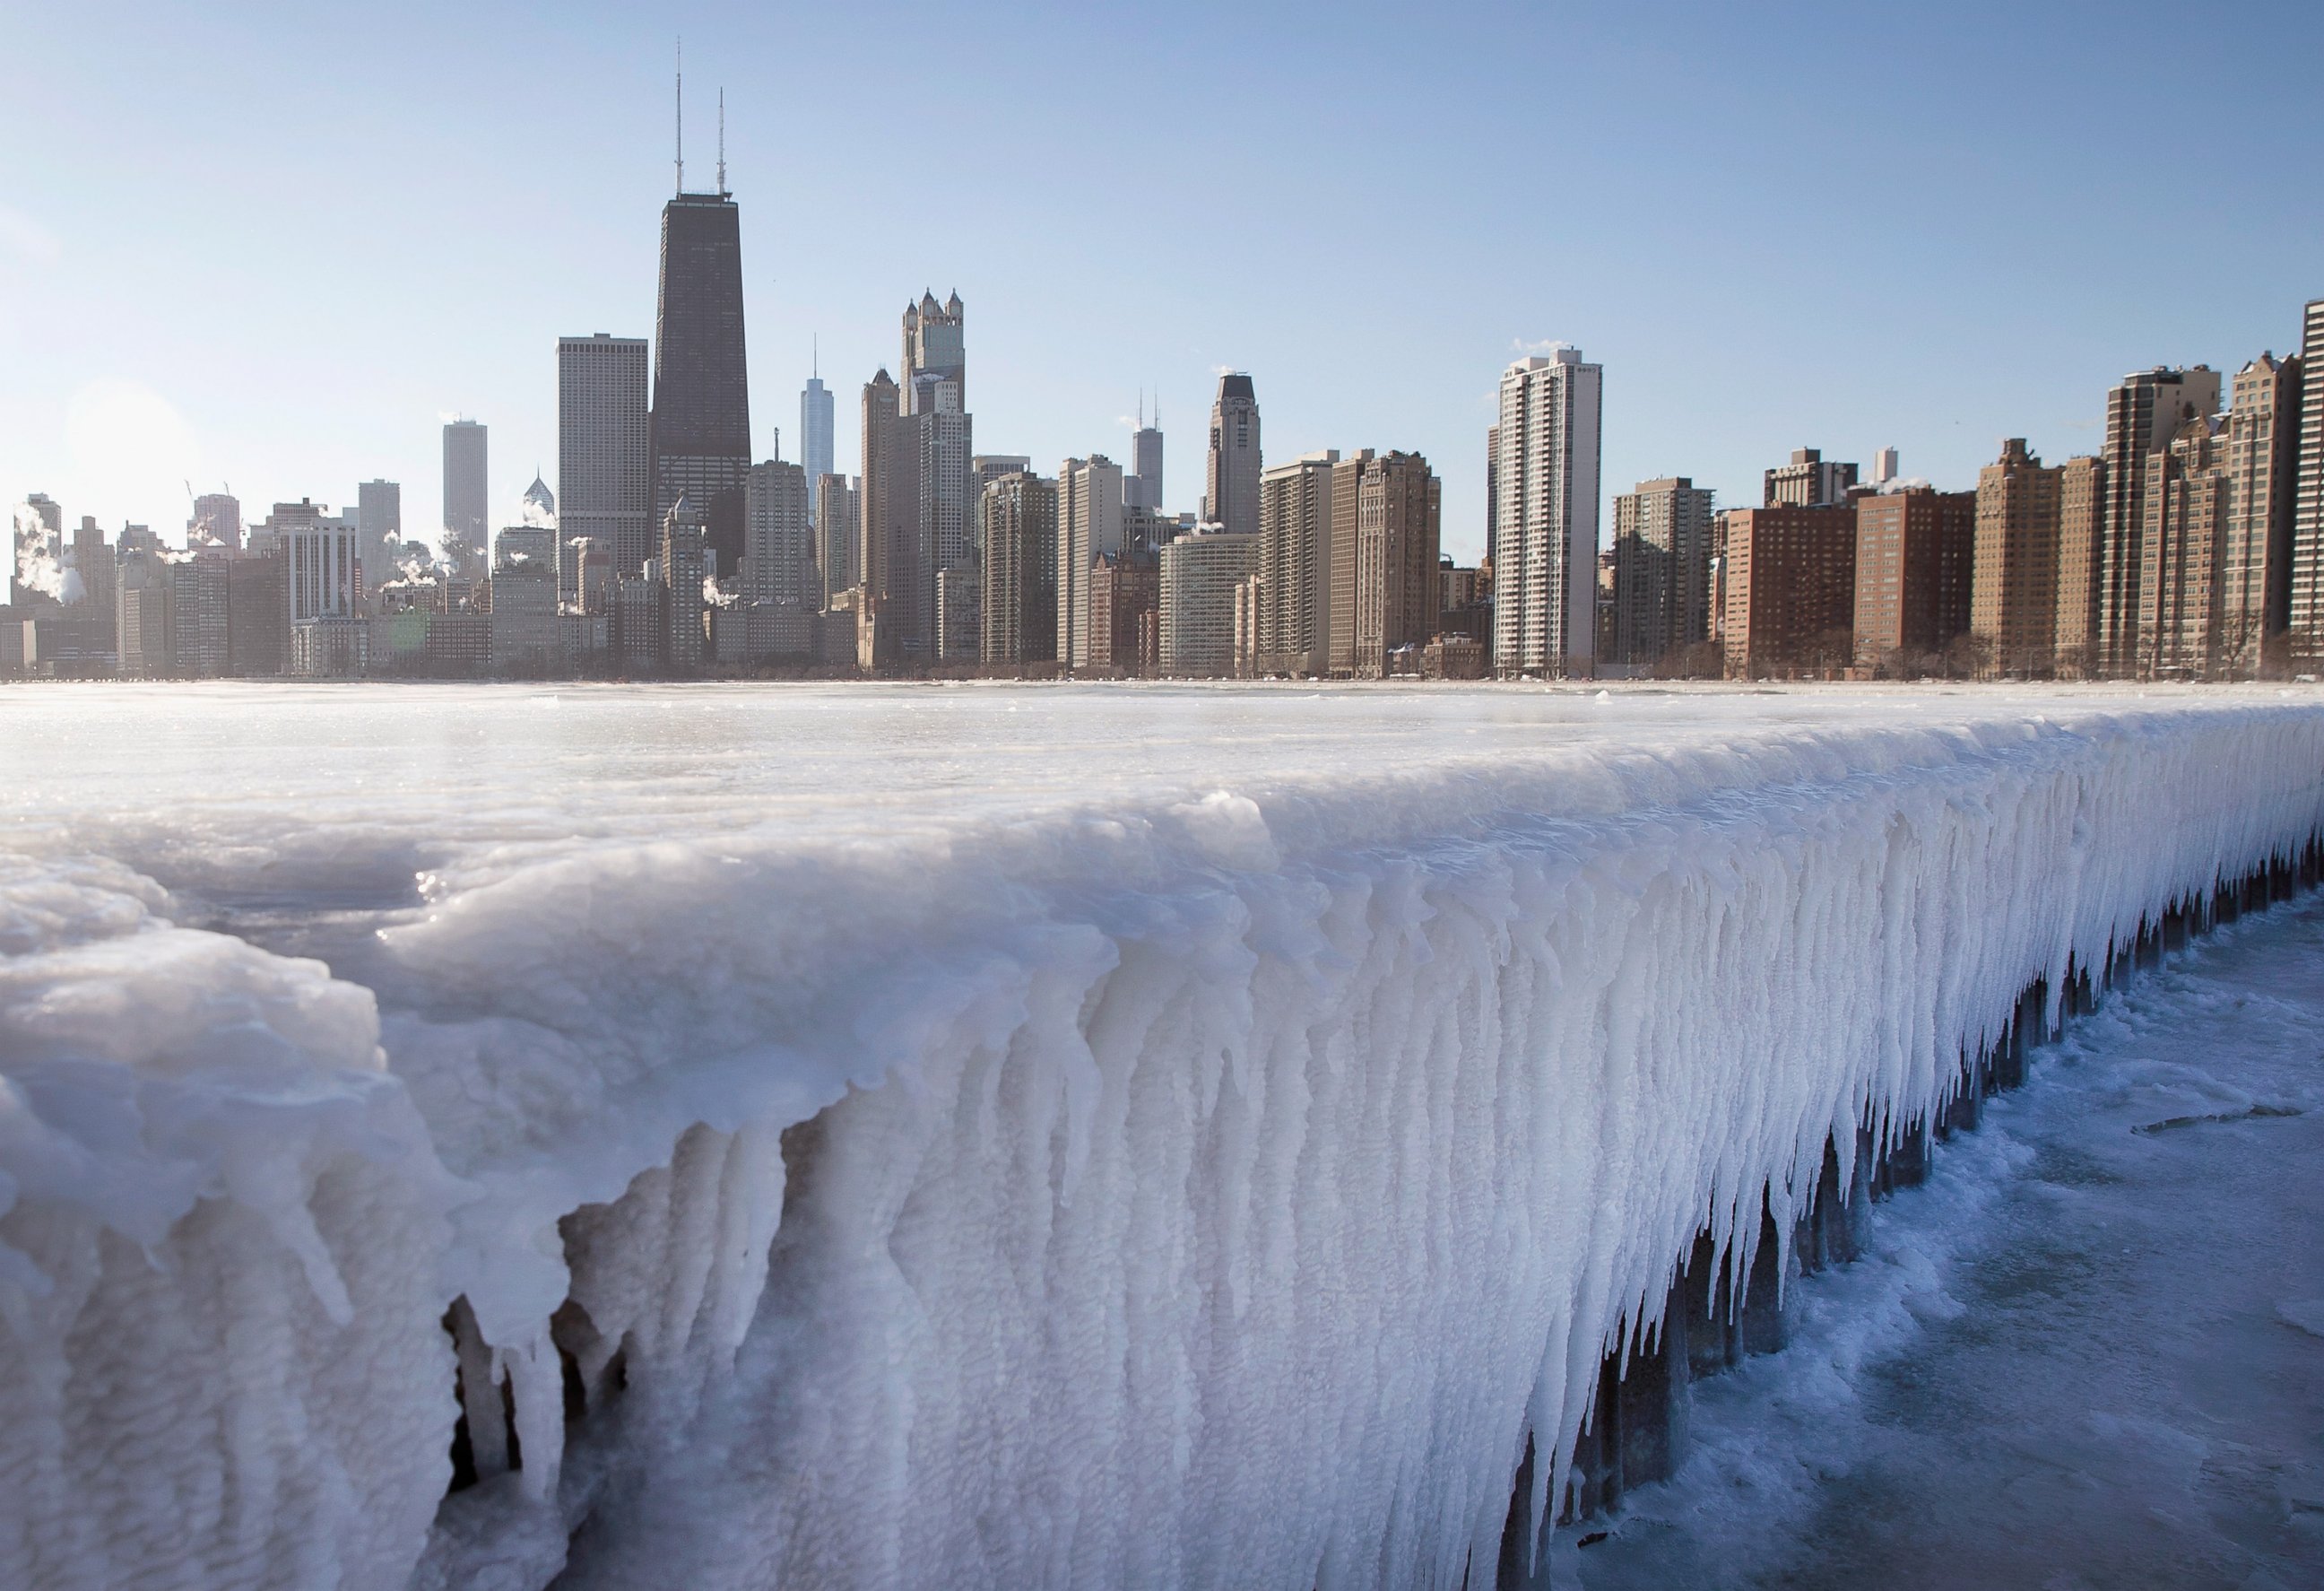 PHOTO: Ice builds up along North Avenue Pier while temperatures hovered around zero degrees Fahrenheit on Jan. 7, 2015 in Chicago, Ill.